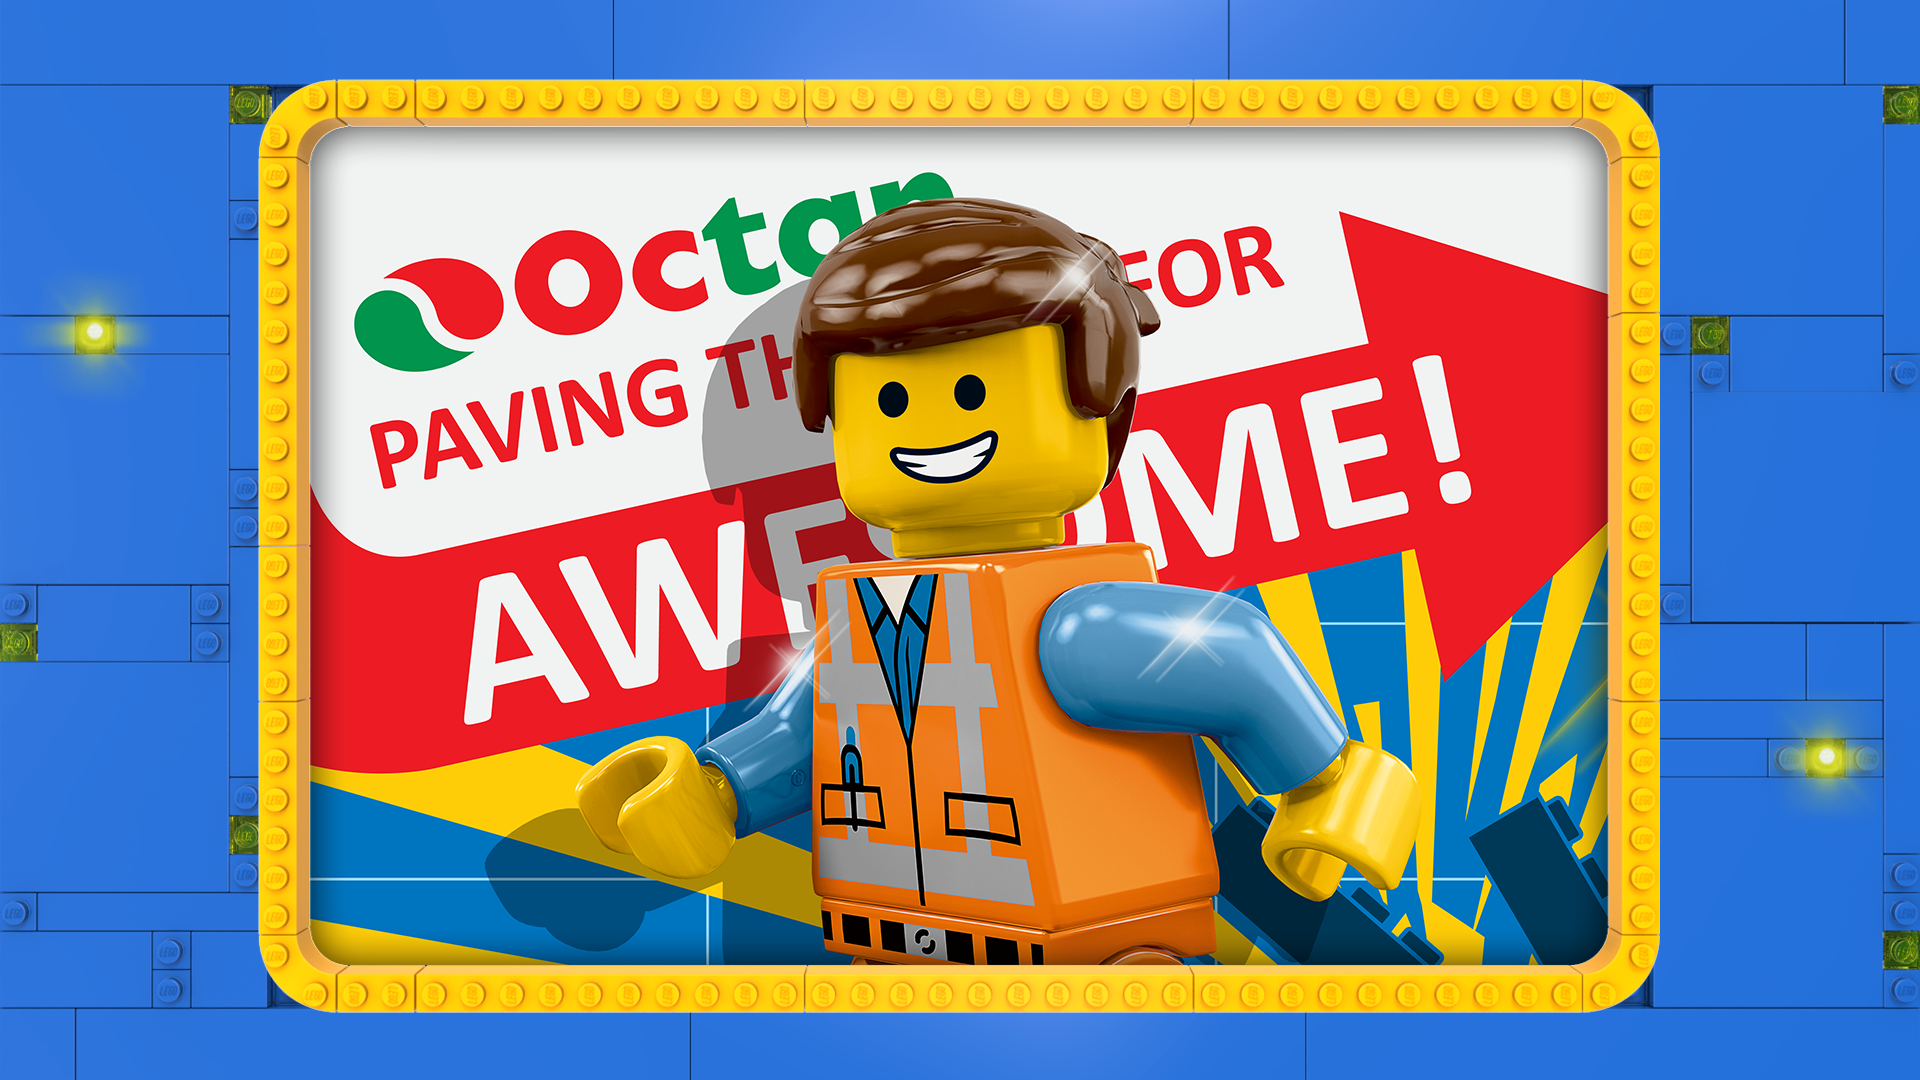 Everything Is Awesome!